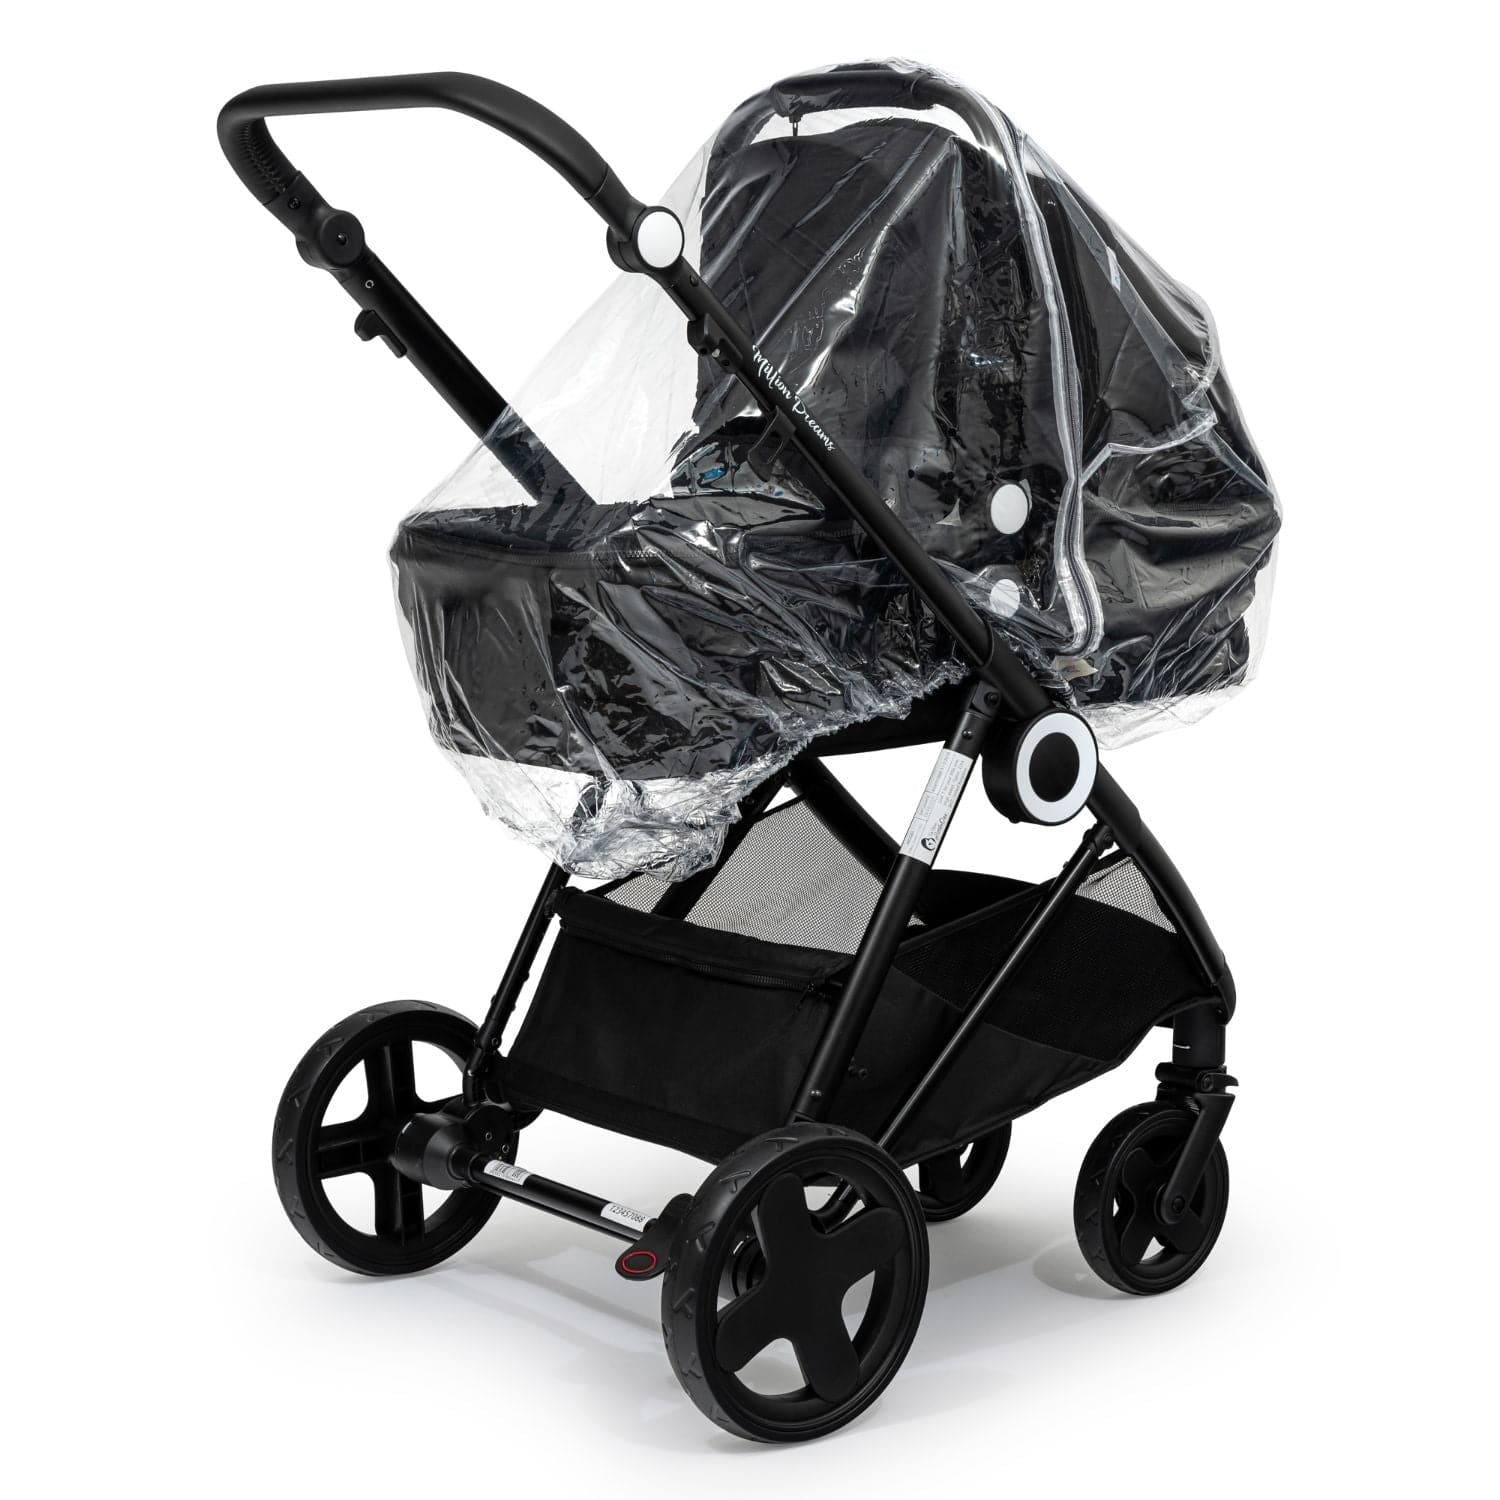 Carrycot Raincover Compatible With Gesslein - Fits All Models - For Your Little One